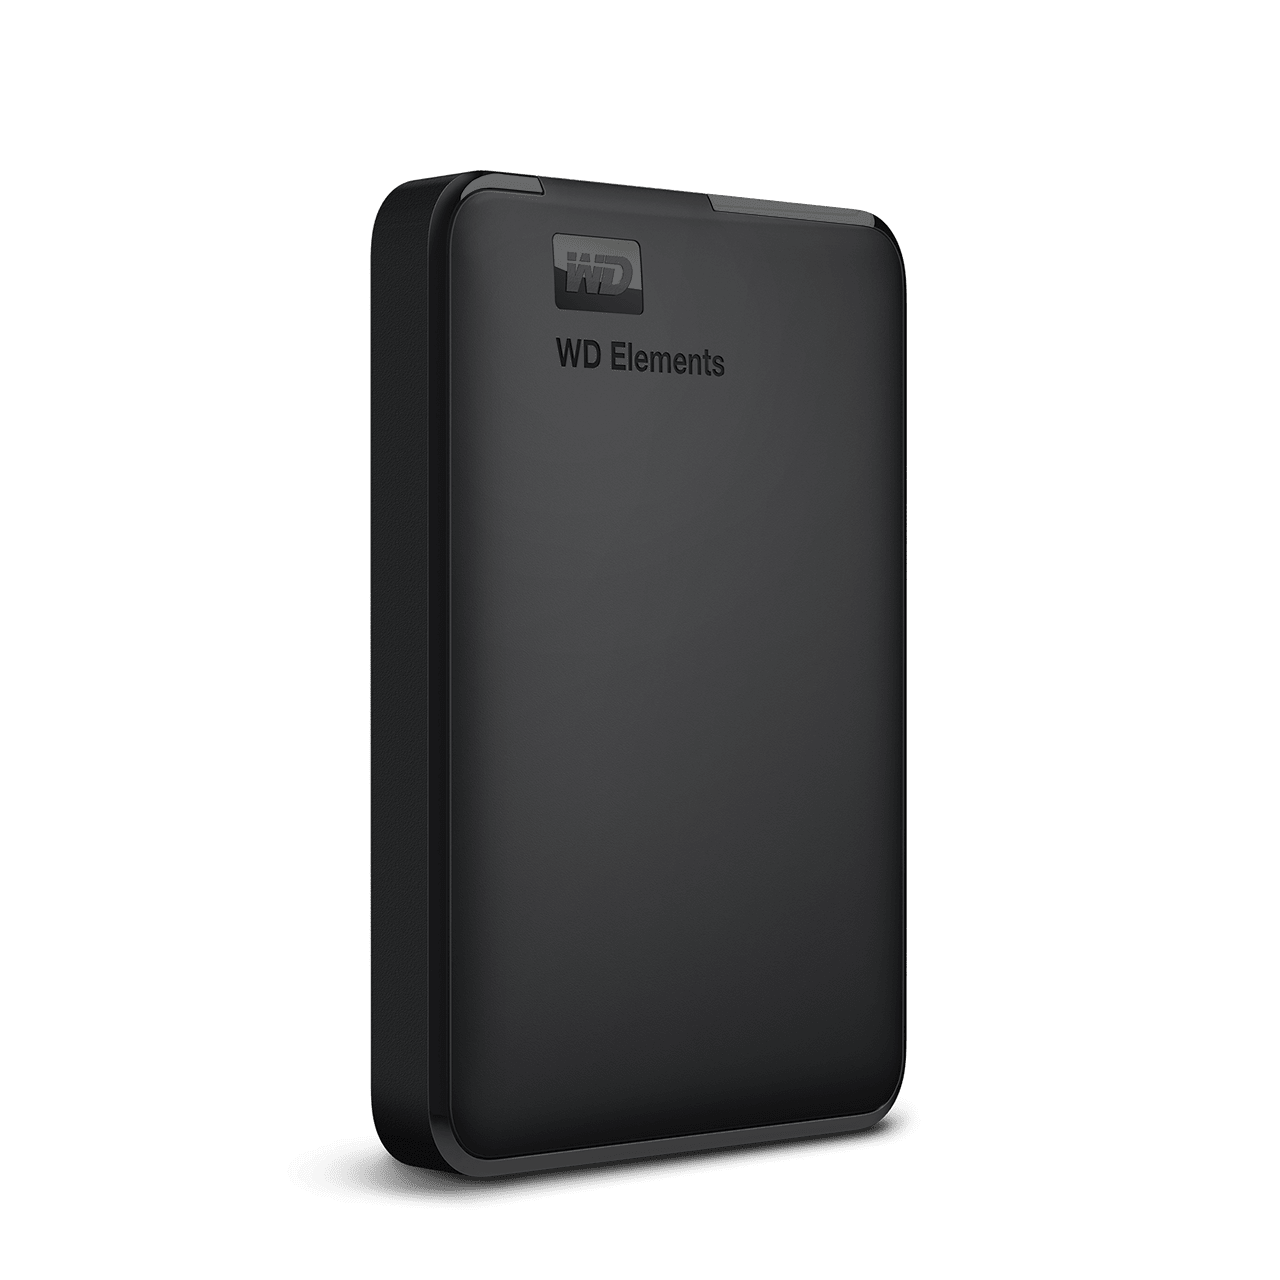 wd-elements-portable-1-2tb-right.png.thumb.1280.1280